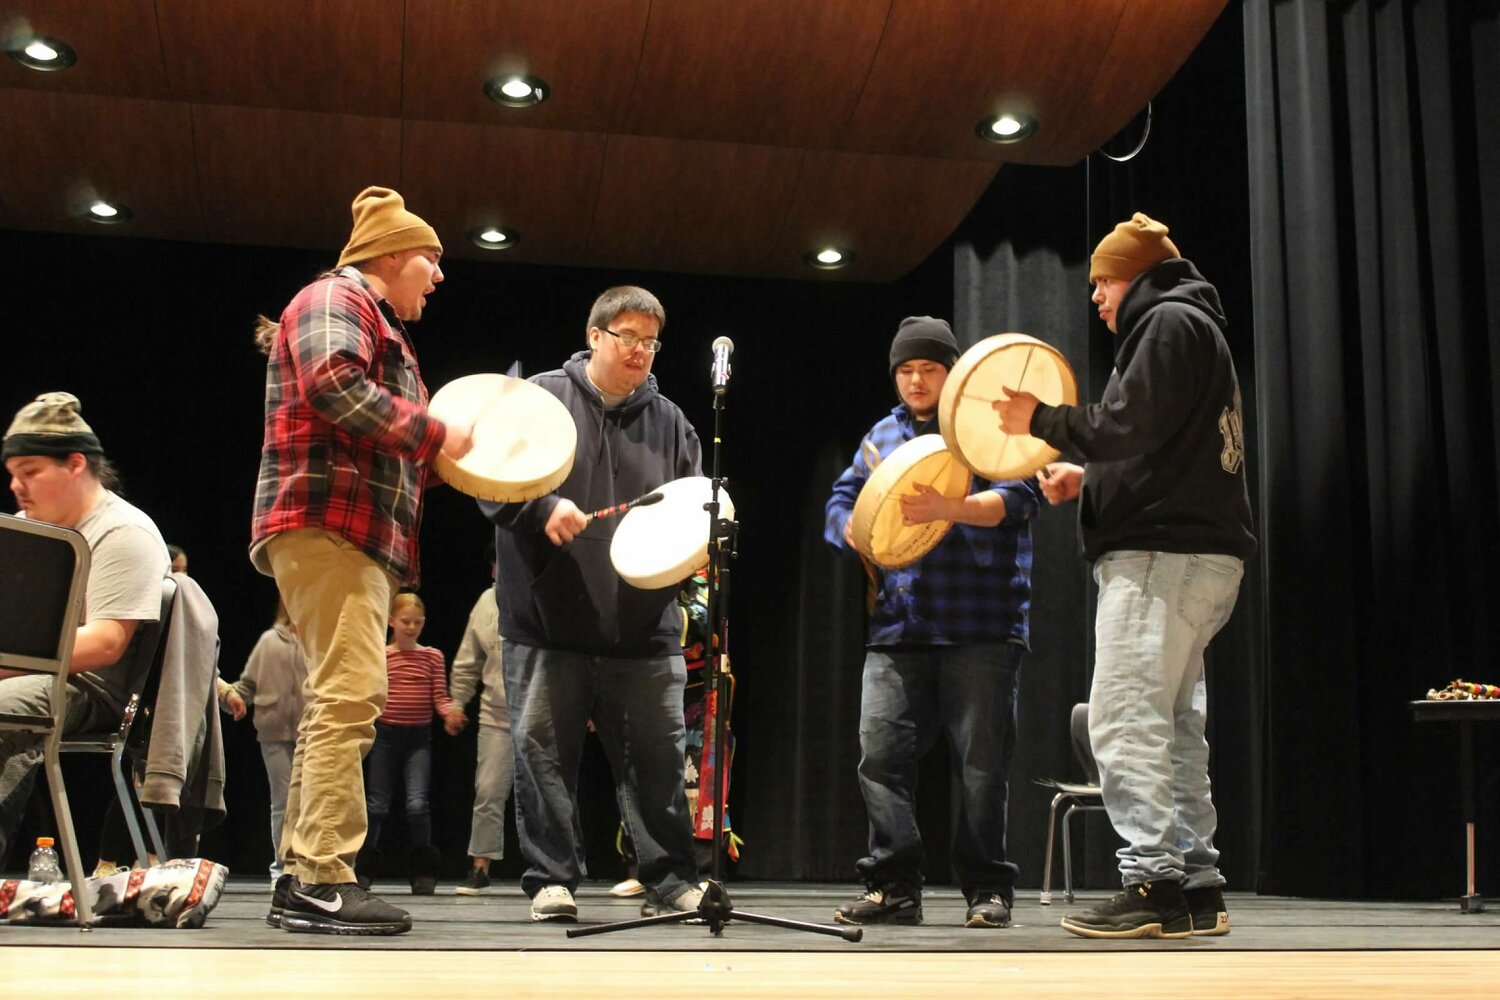 The Ojibwe Drumming and Singing Group Tomahawk Circle performance at Prescott High School Feb. 3 was made possible by grants from the Prescott Foundation, St. Croix Valley Foundation, and the Building an All Inclusive Community Group (BAIC).